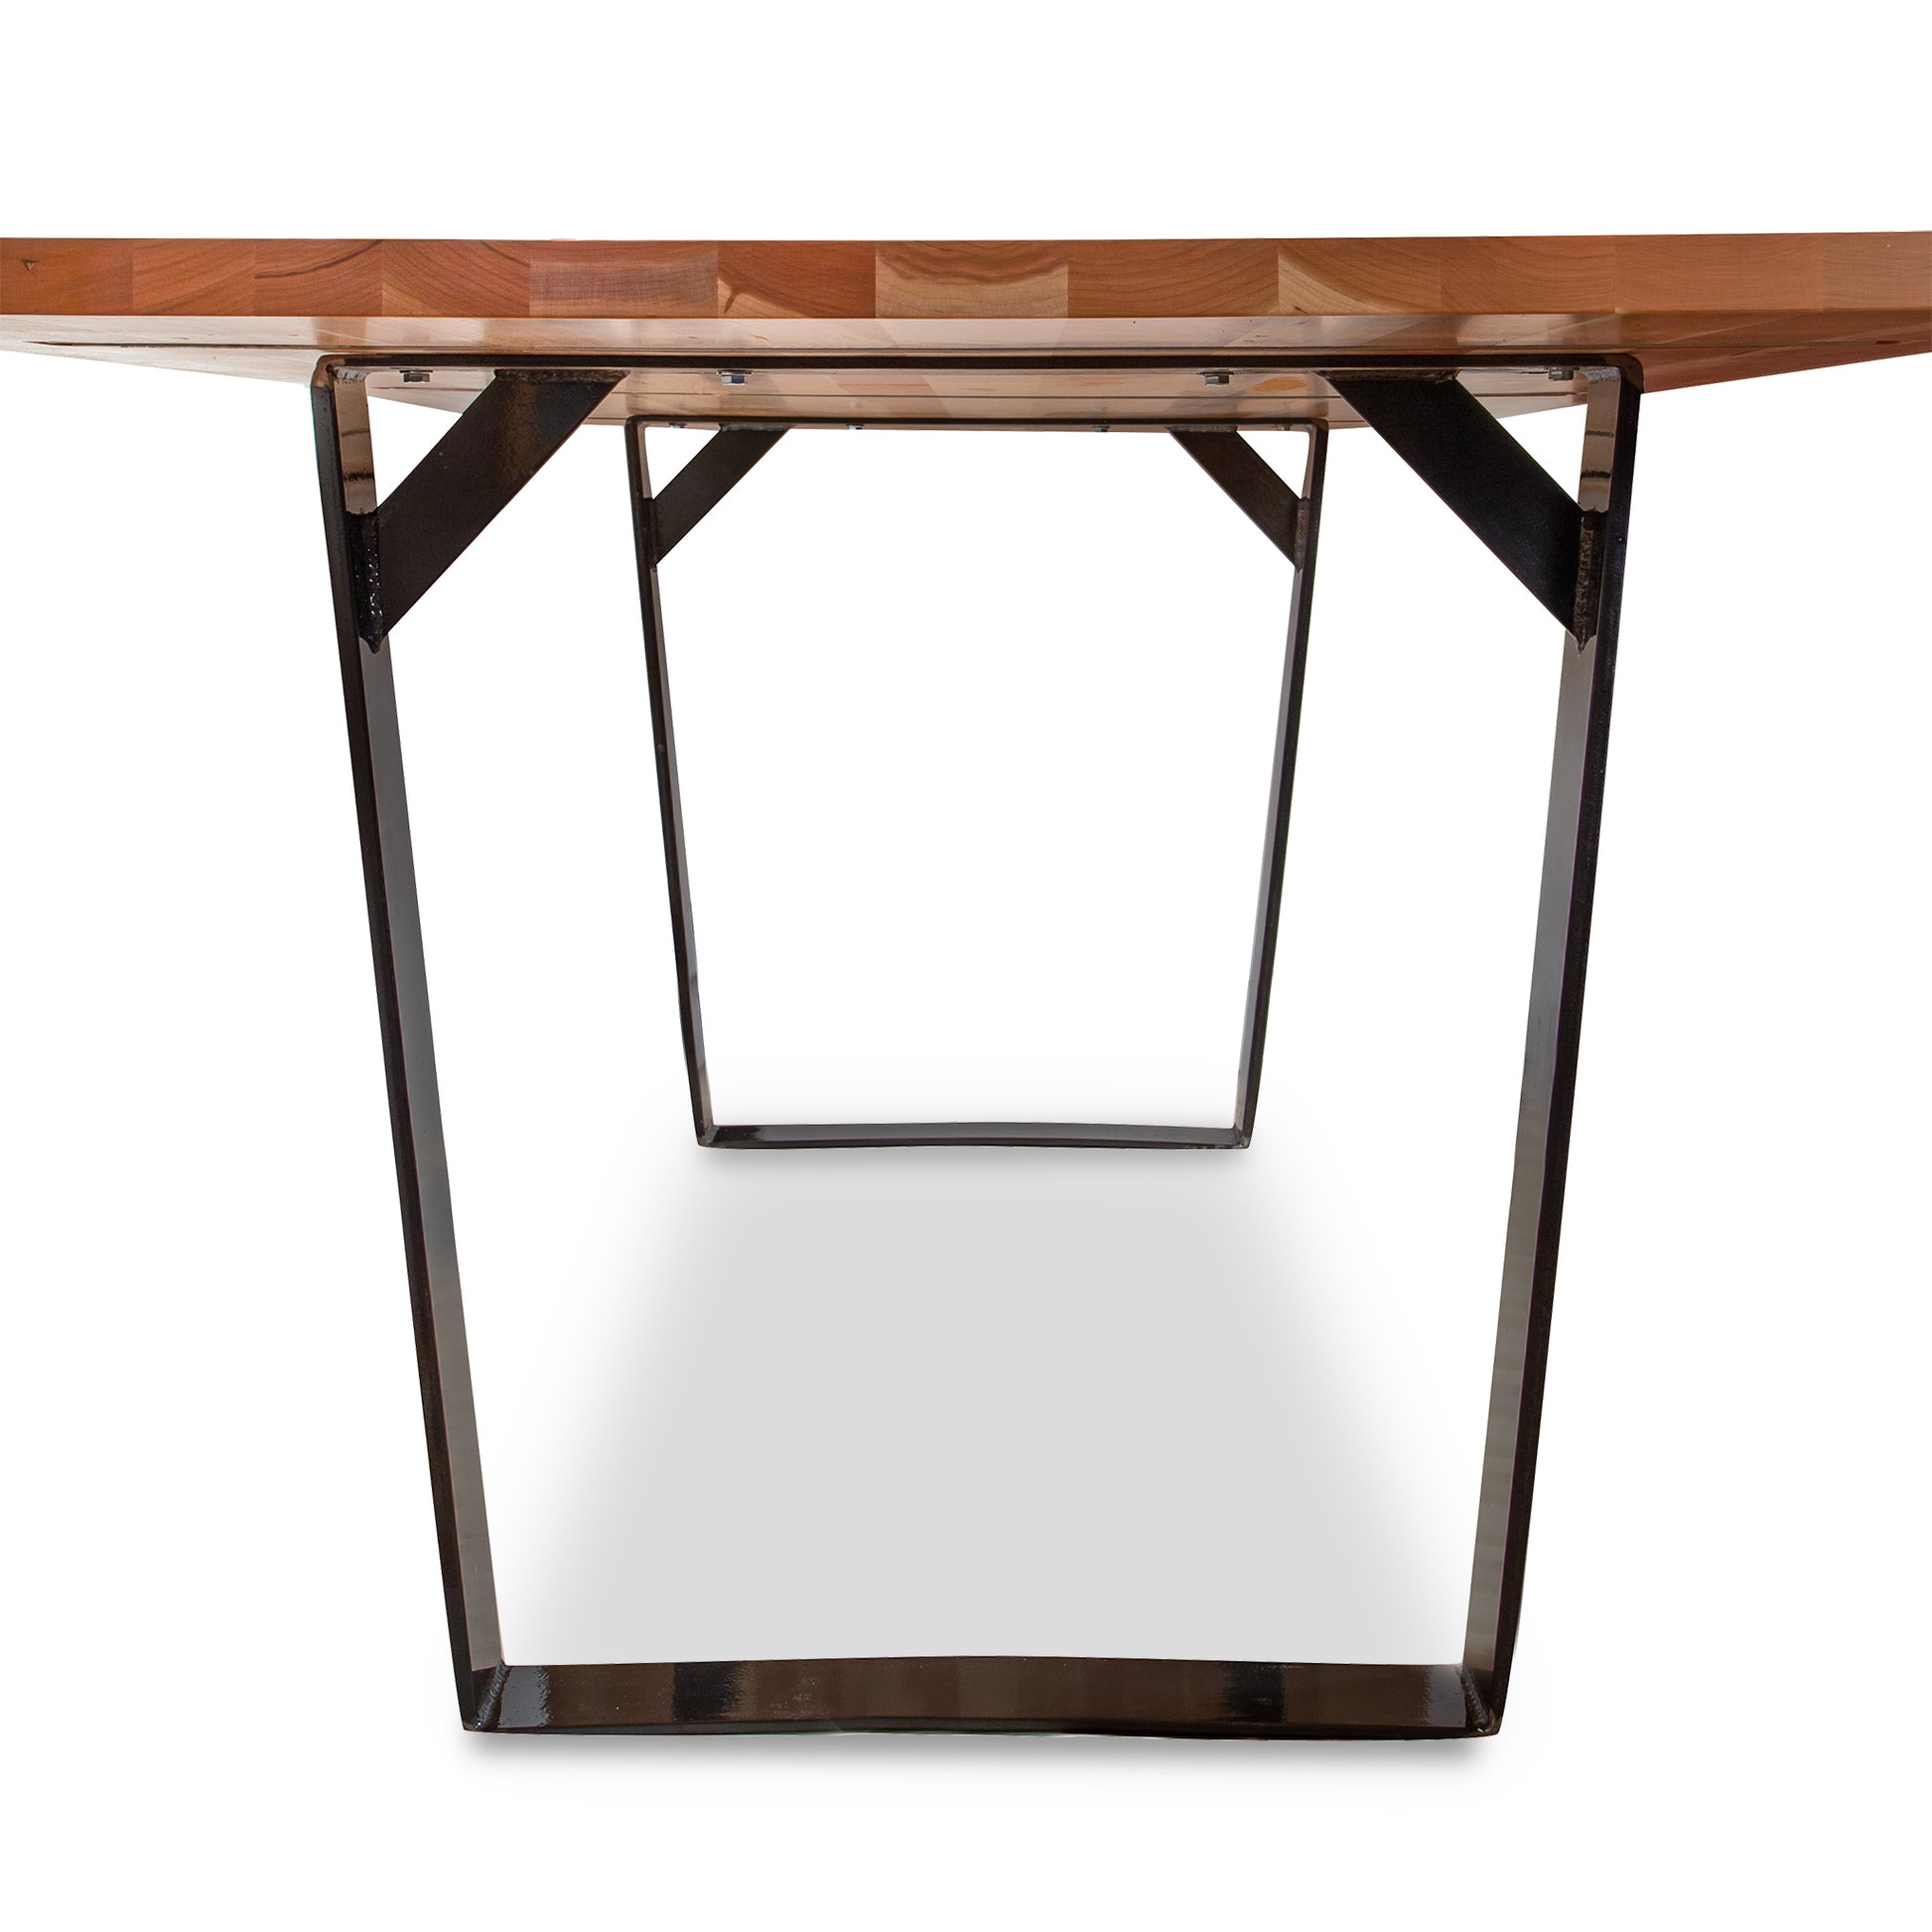 A Metropolitan Solid Top Dining Table by Lyndon Furniture, with a hardwood plank top and metal base.